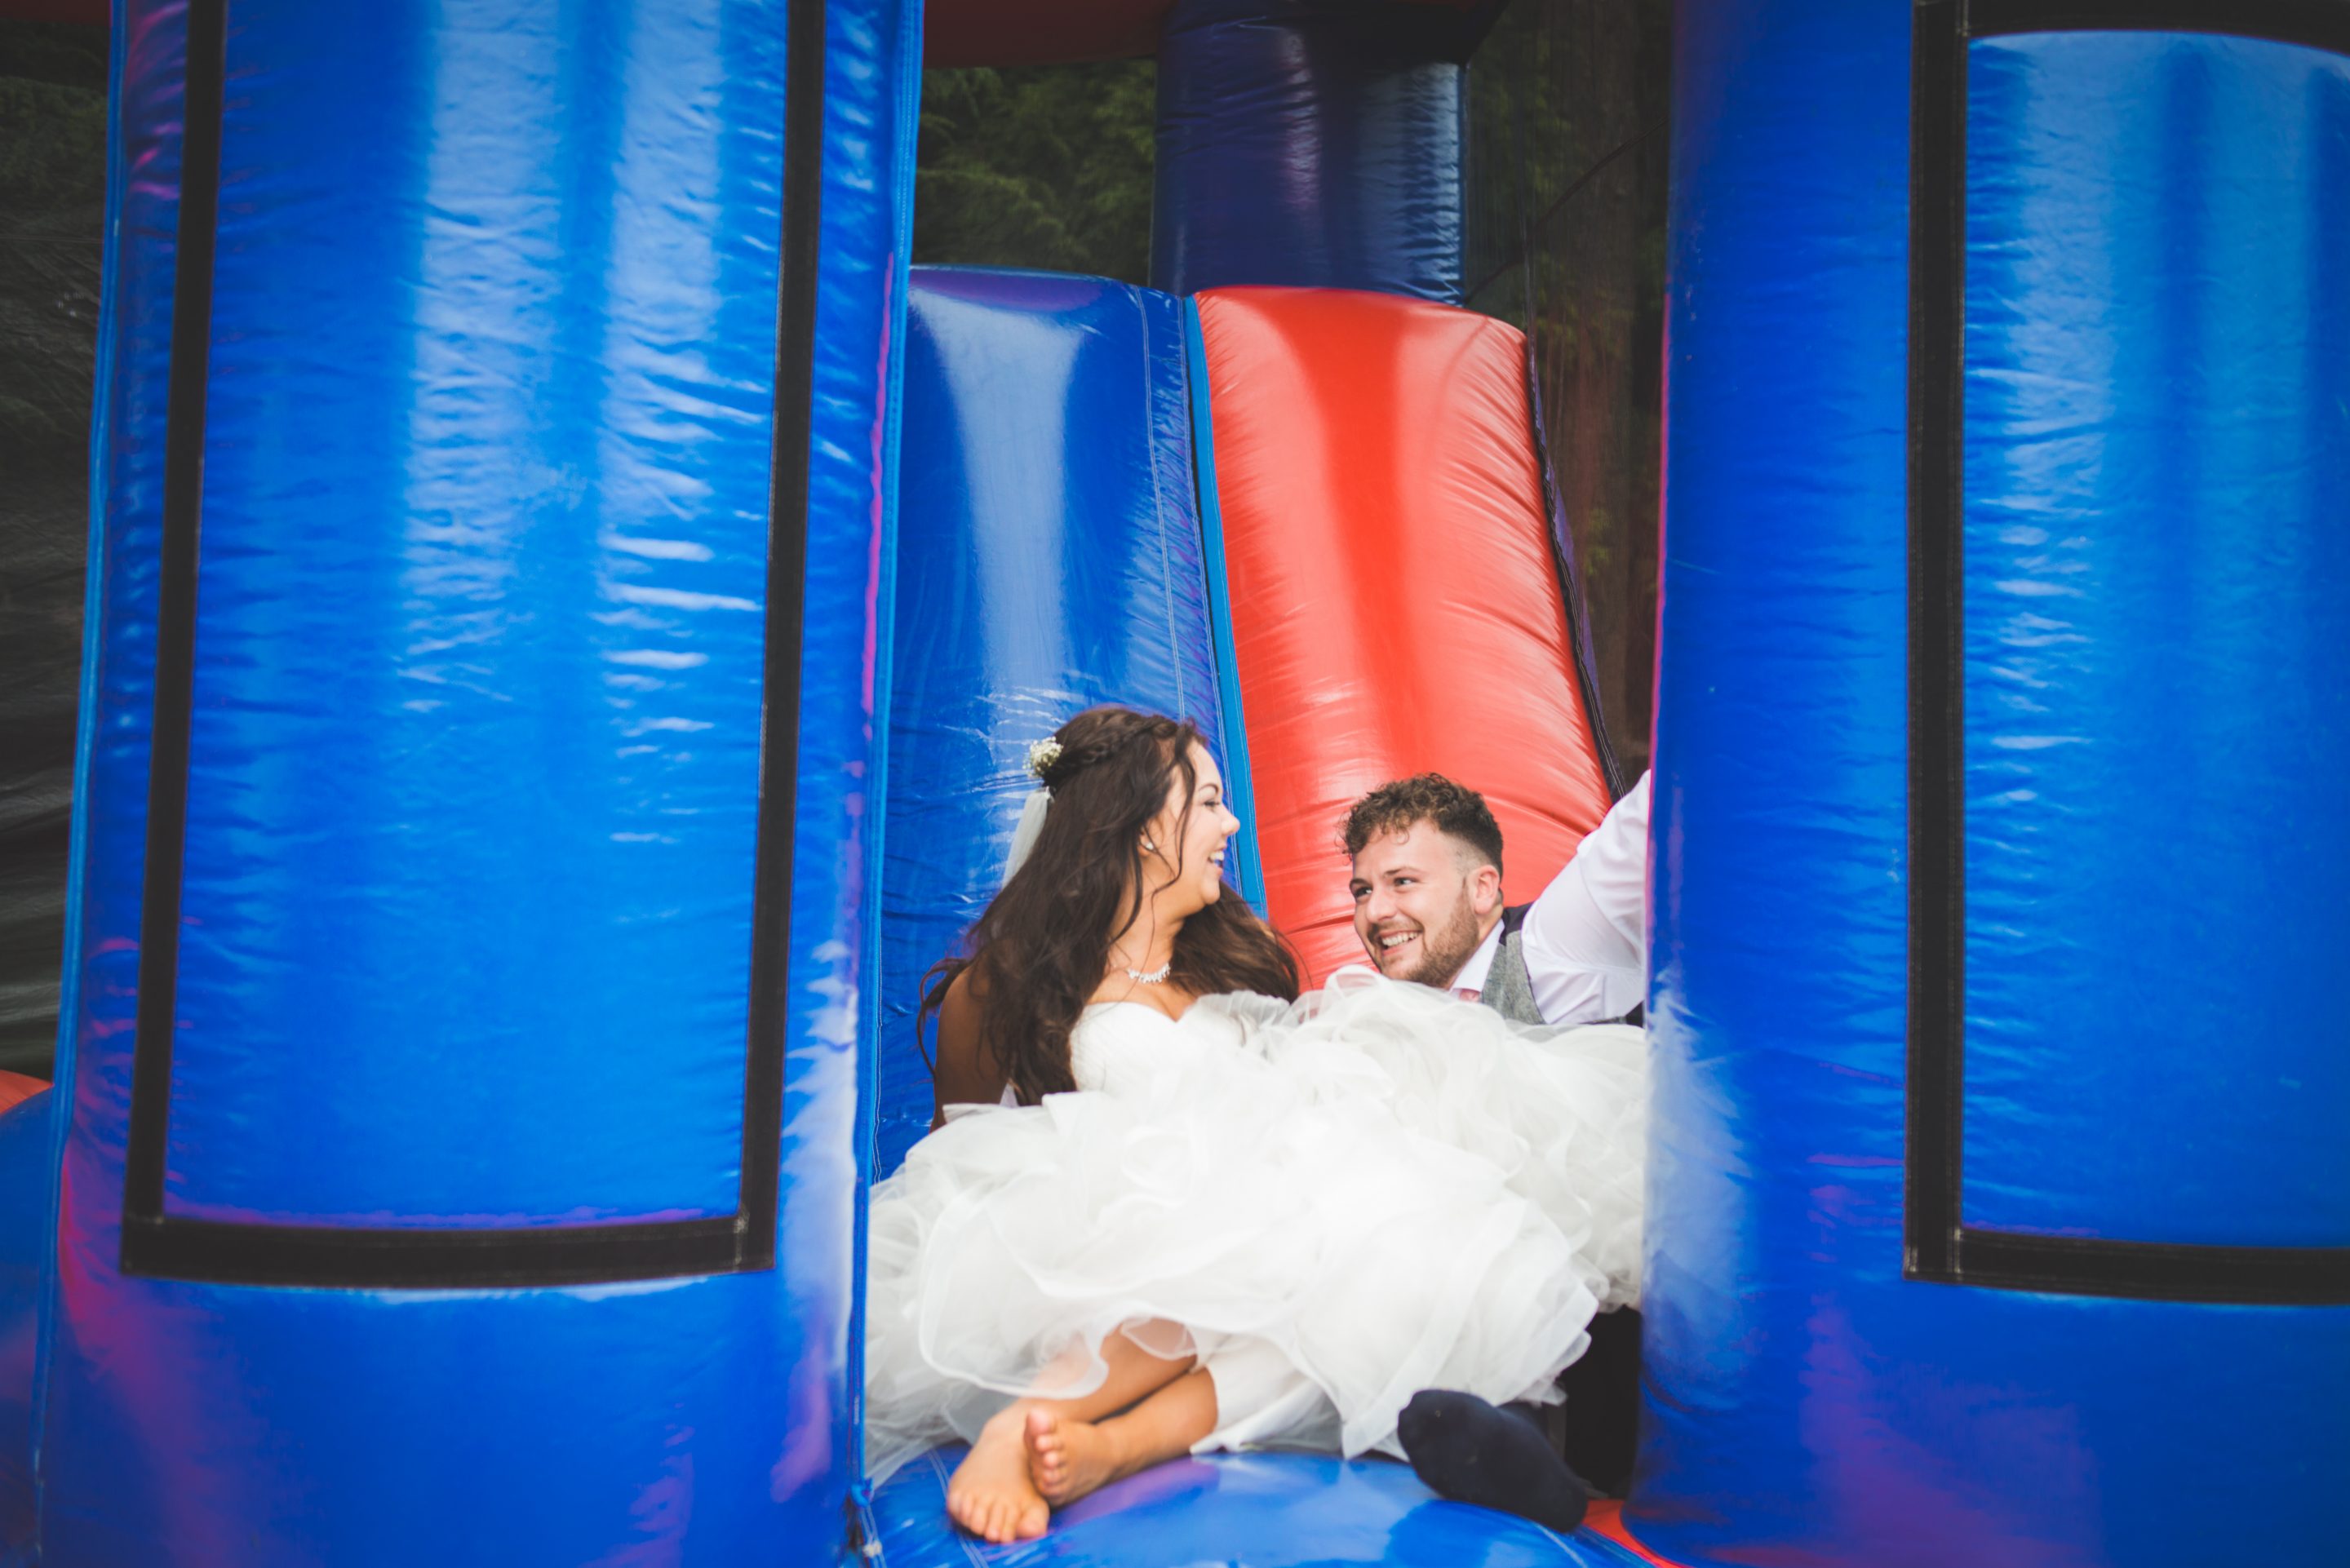 Bouncy Castle for the bride and groom